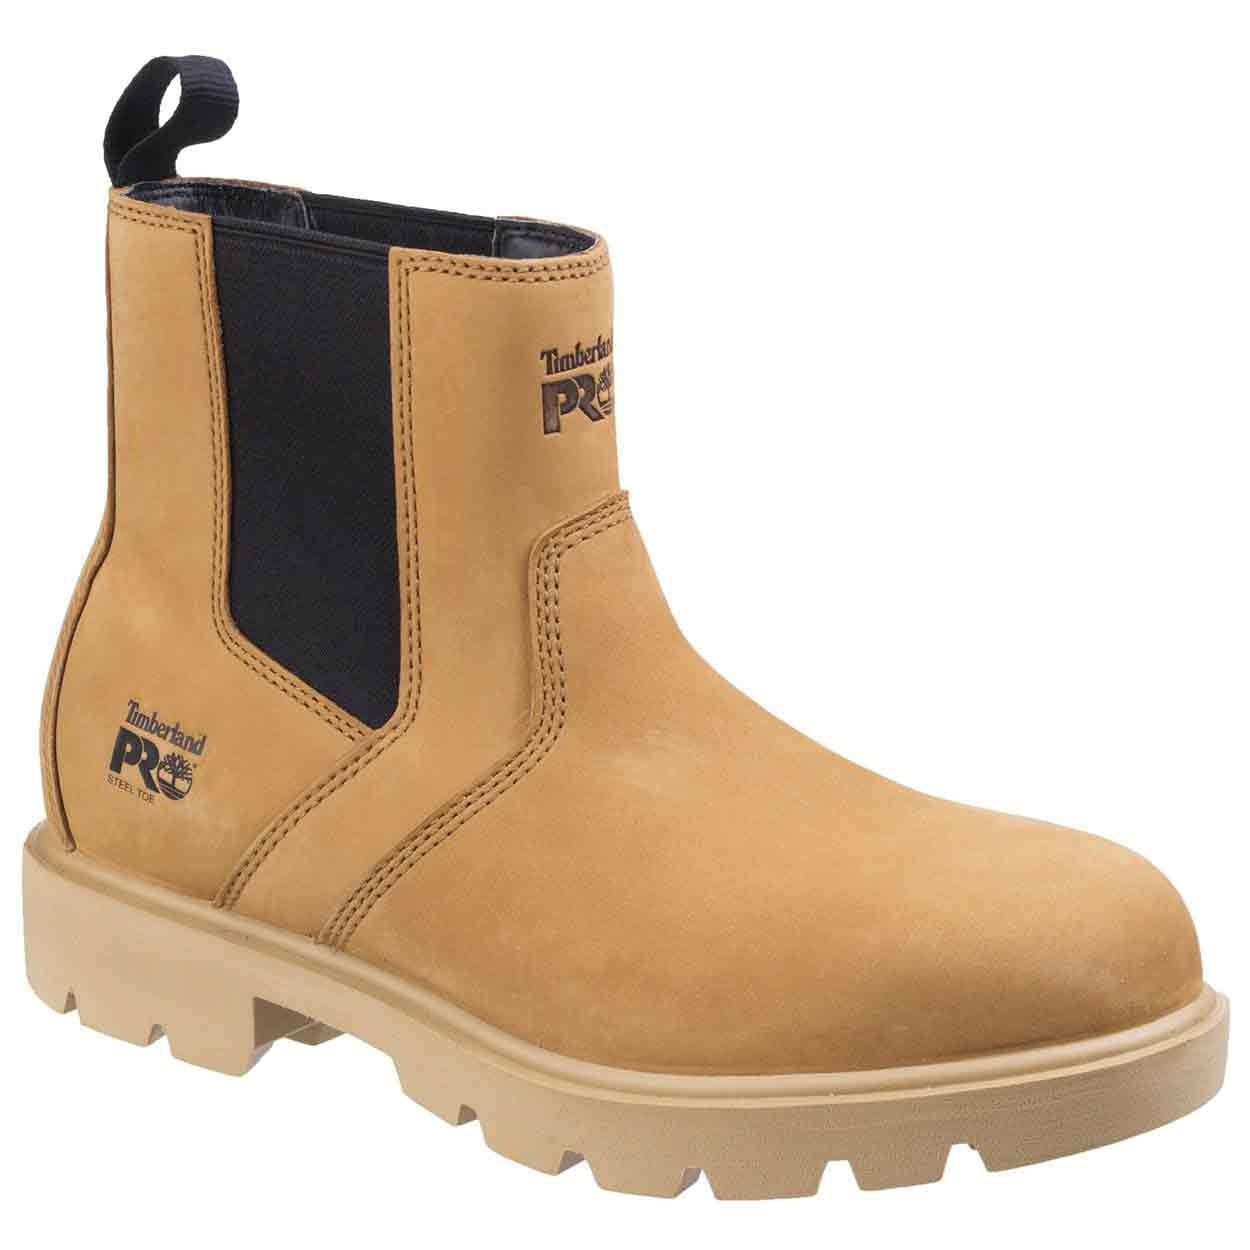 Timberland Pro Sawhorse Dealer - Standard Safety Boots - Mens Safety Boots  & Shoes - Safety Footwear - Best Workwear